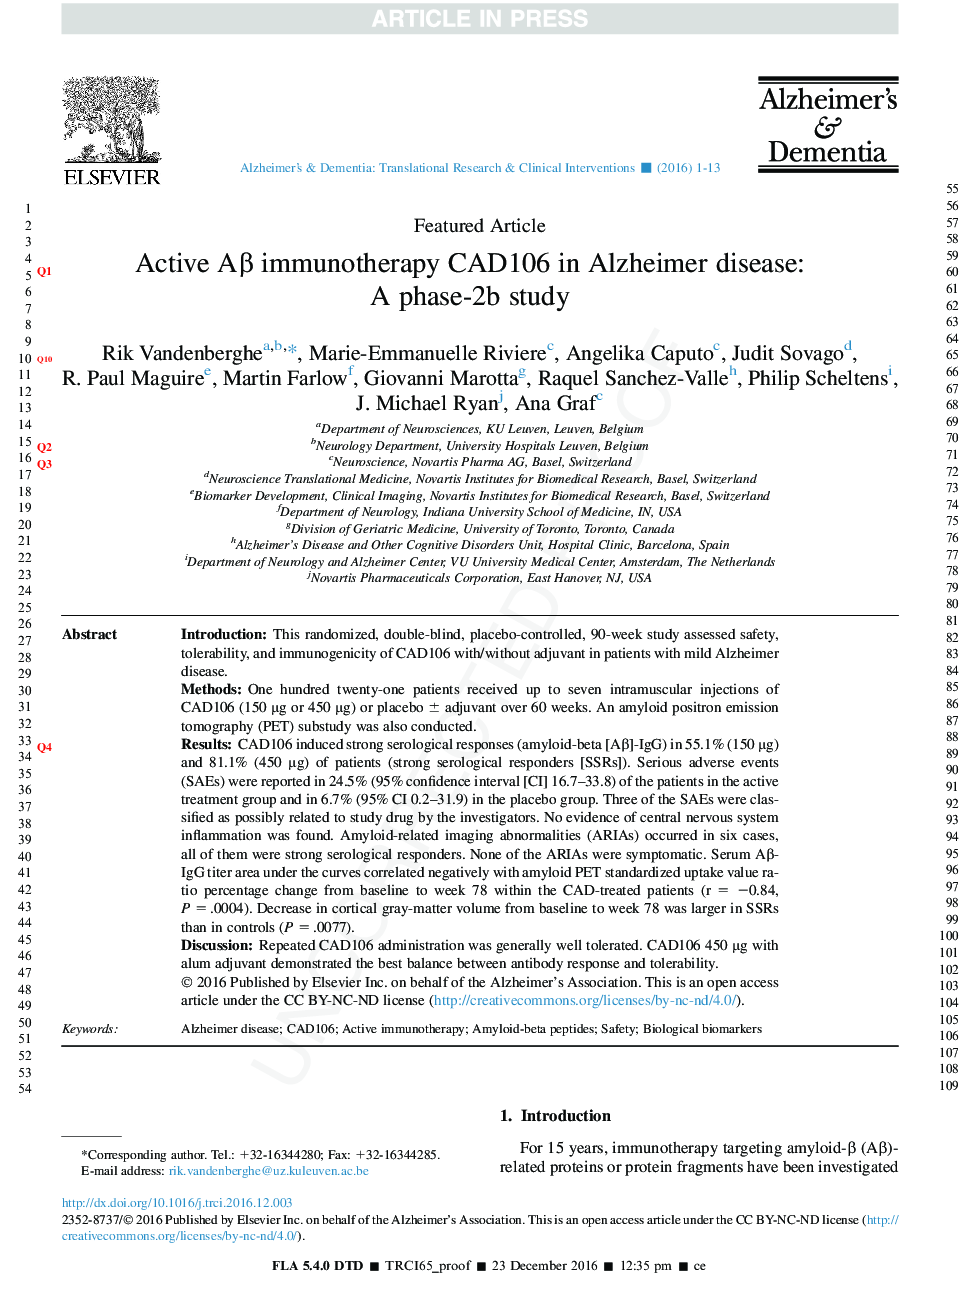 Active AÎ² immunotherapy CAD106 in Alzheimer's disease: A phase 2b study